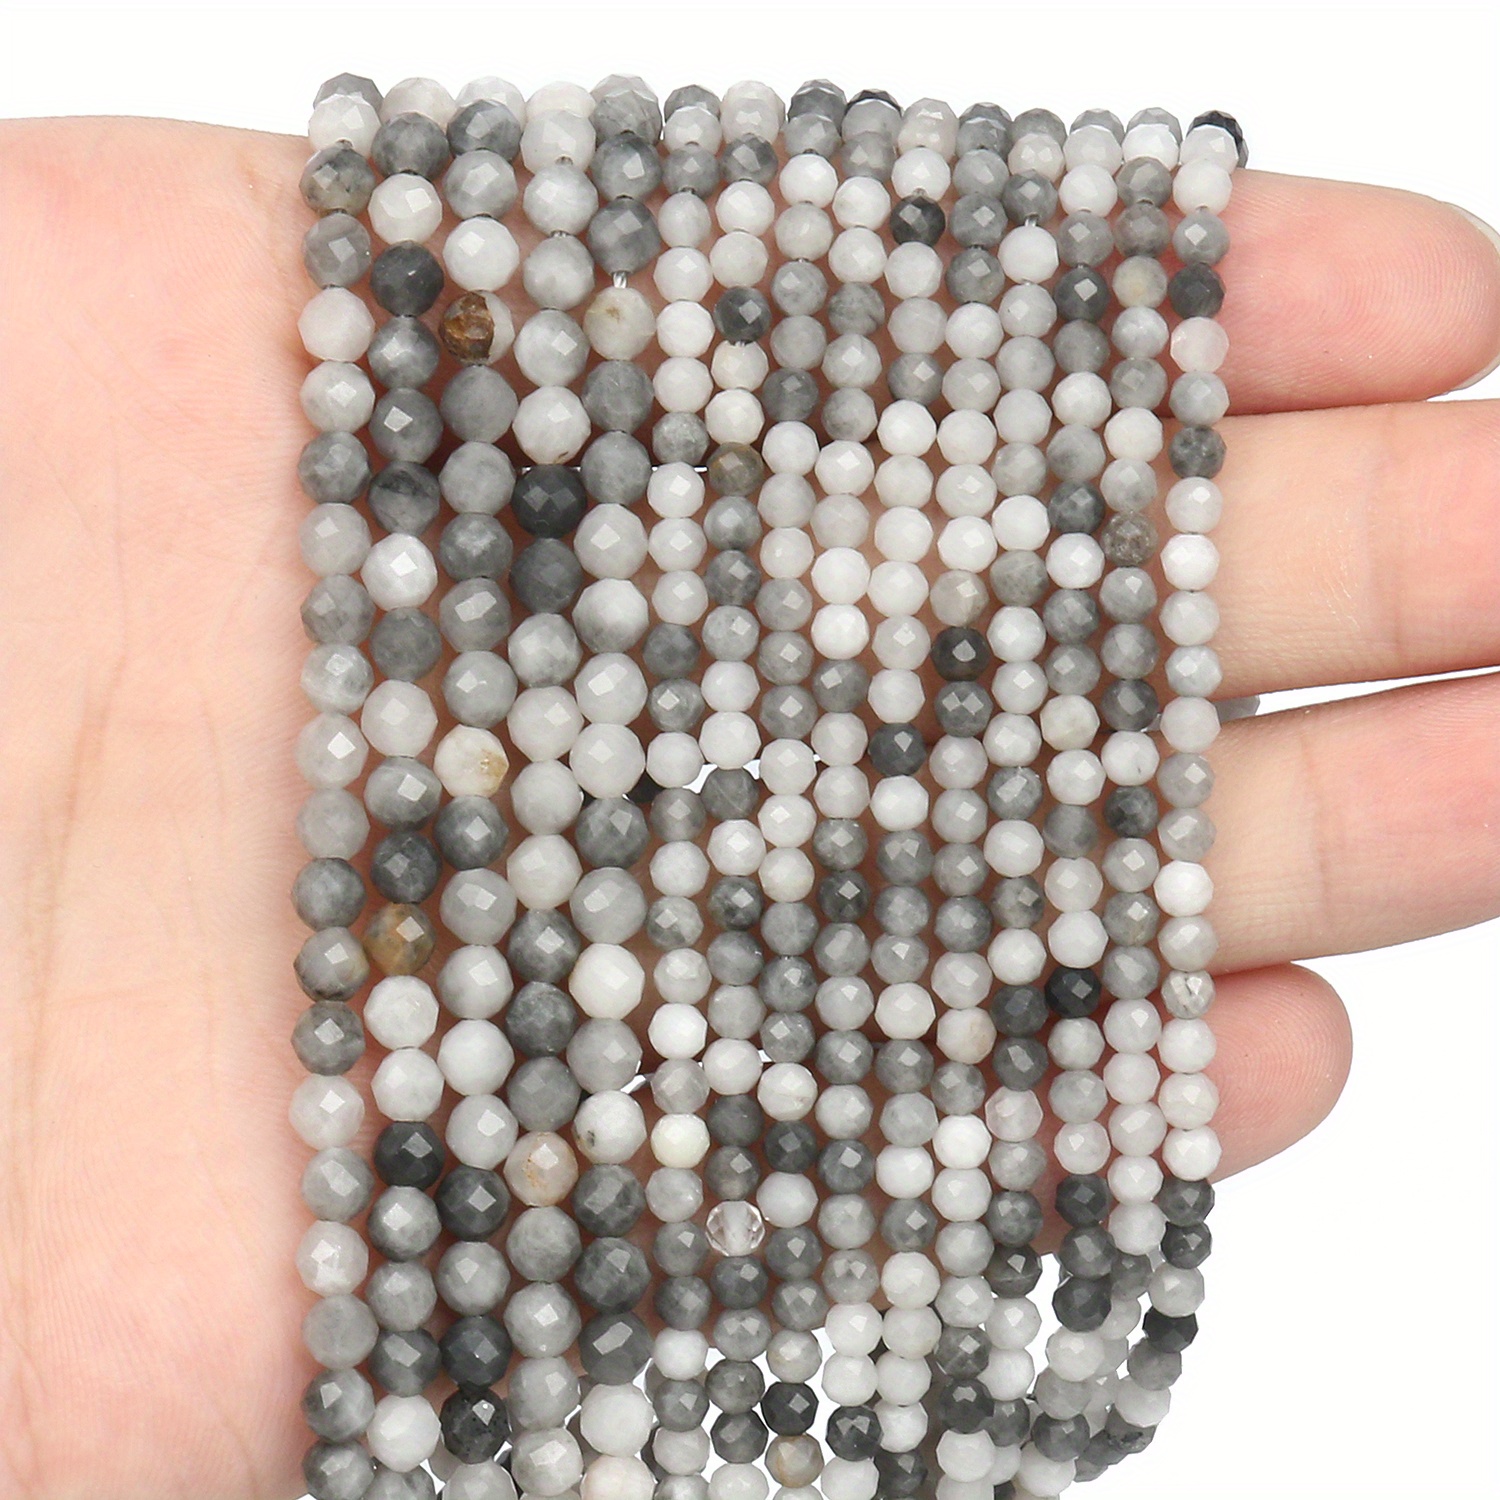 2/3/4mm Natural Faceted Tree Agates Beads Small Loose Spacer Tiny